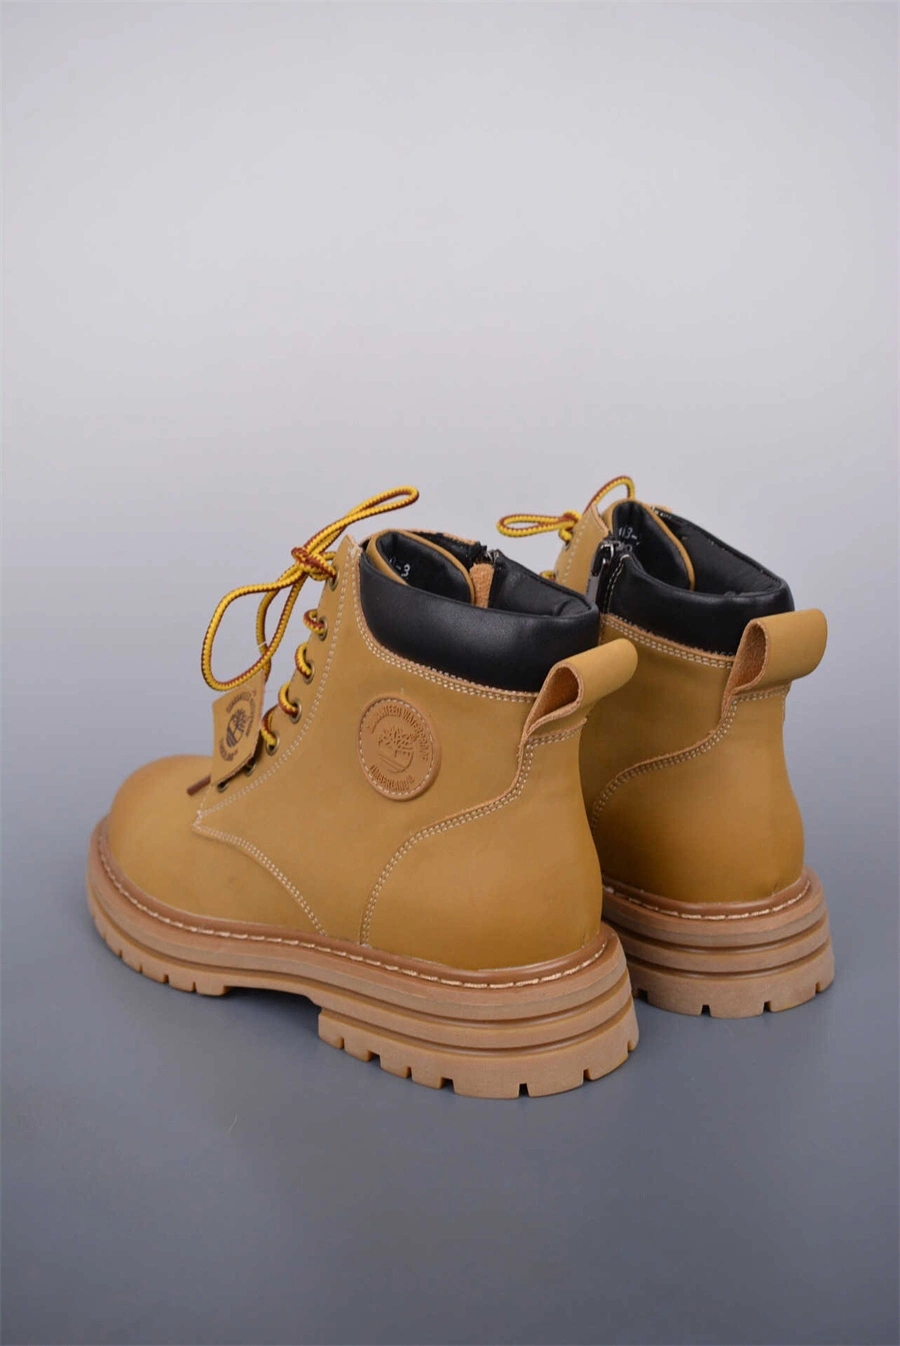 Work Boots Industrial Athletic Shoes Toe Protection Safety Shoes